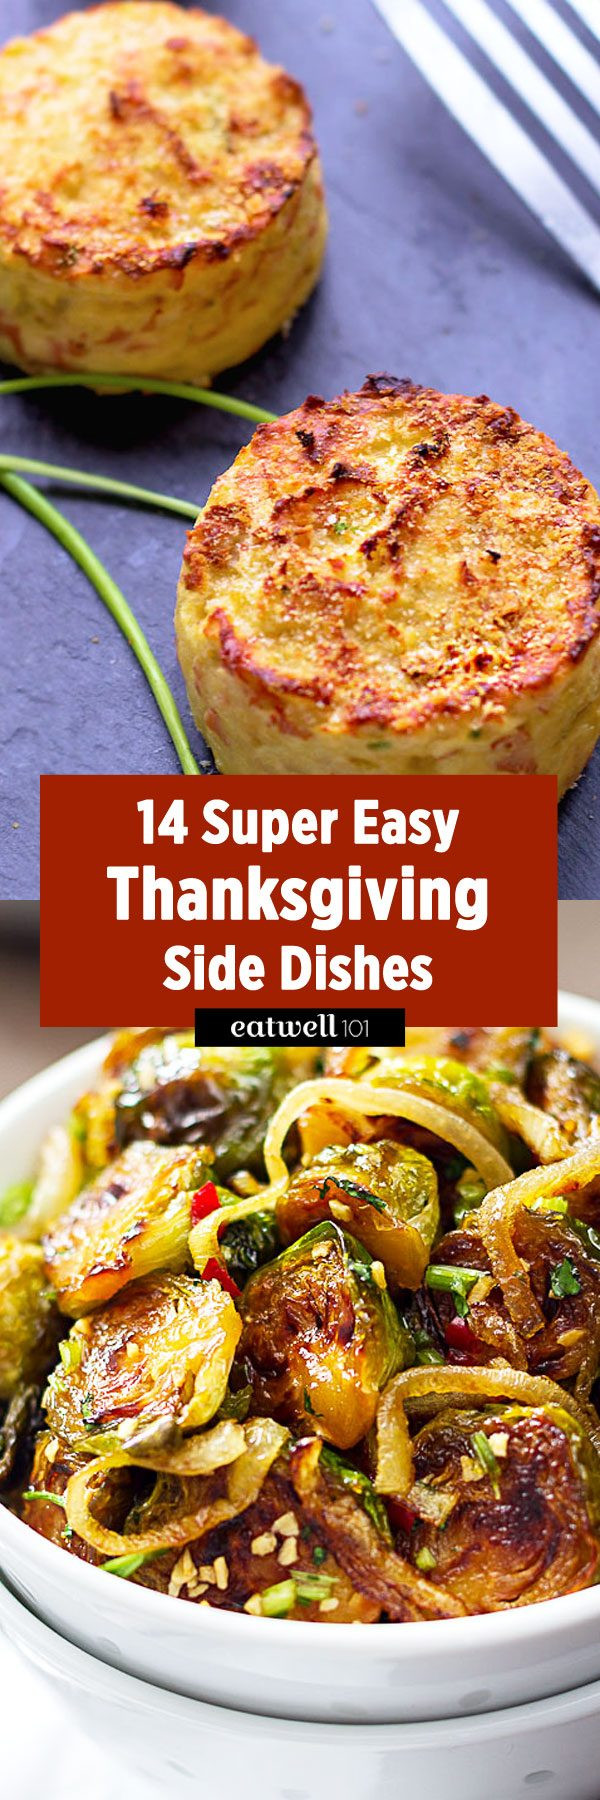 Easy Side Dishes For Thanksgiving
 Up Your Thanksgiving With These Super Easy Side Dishes